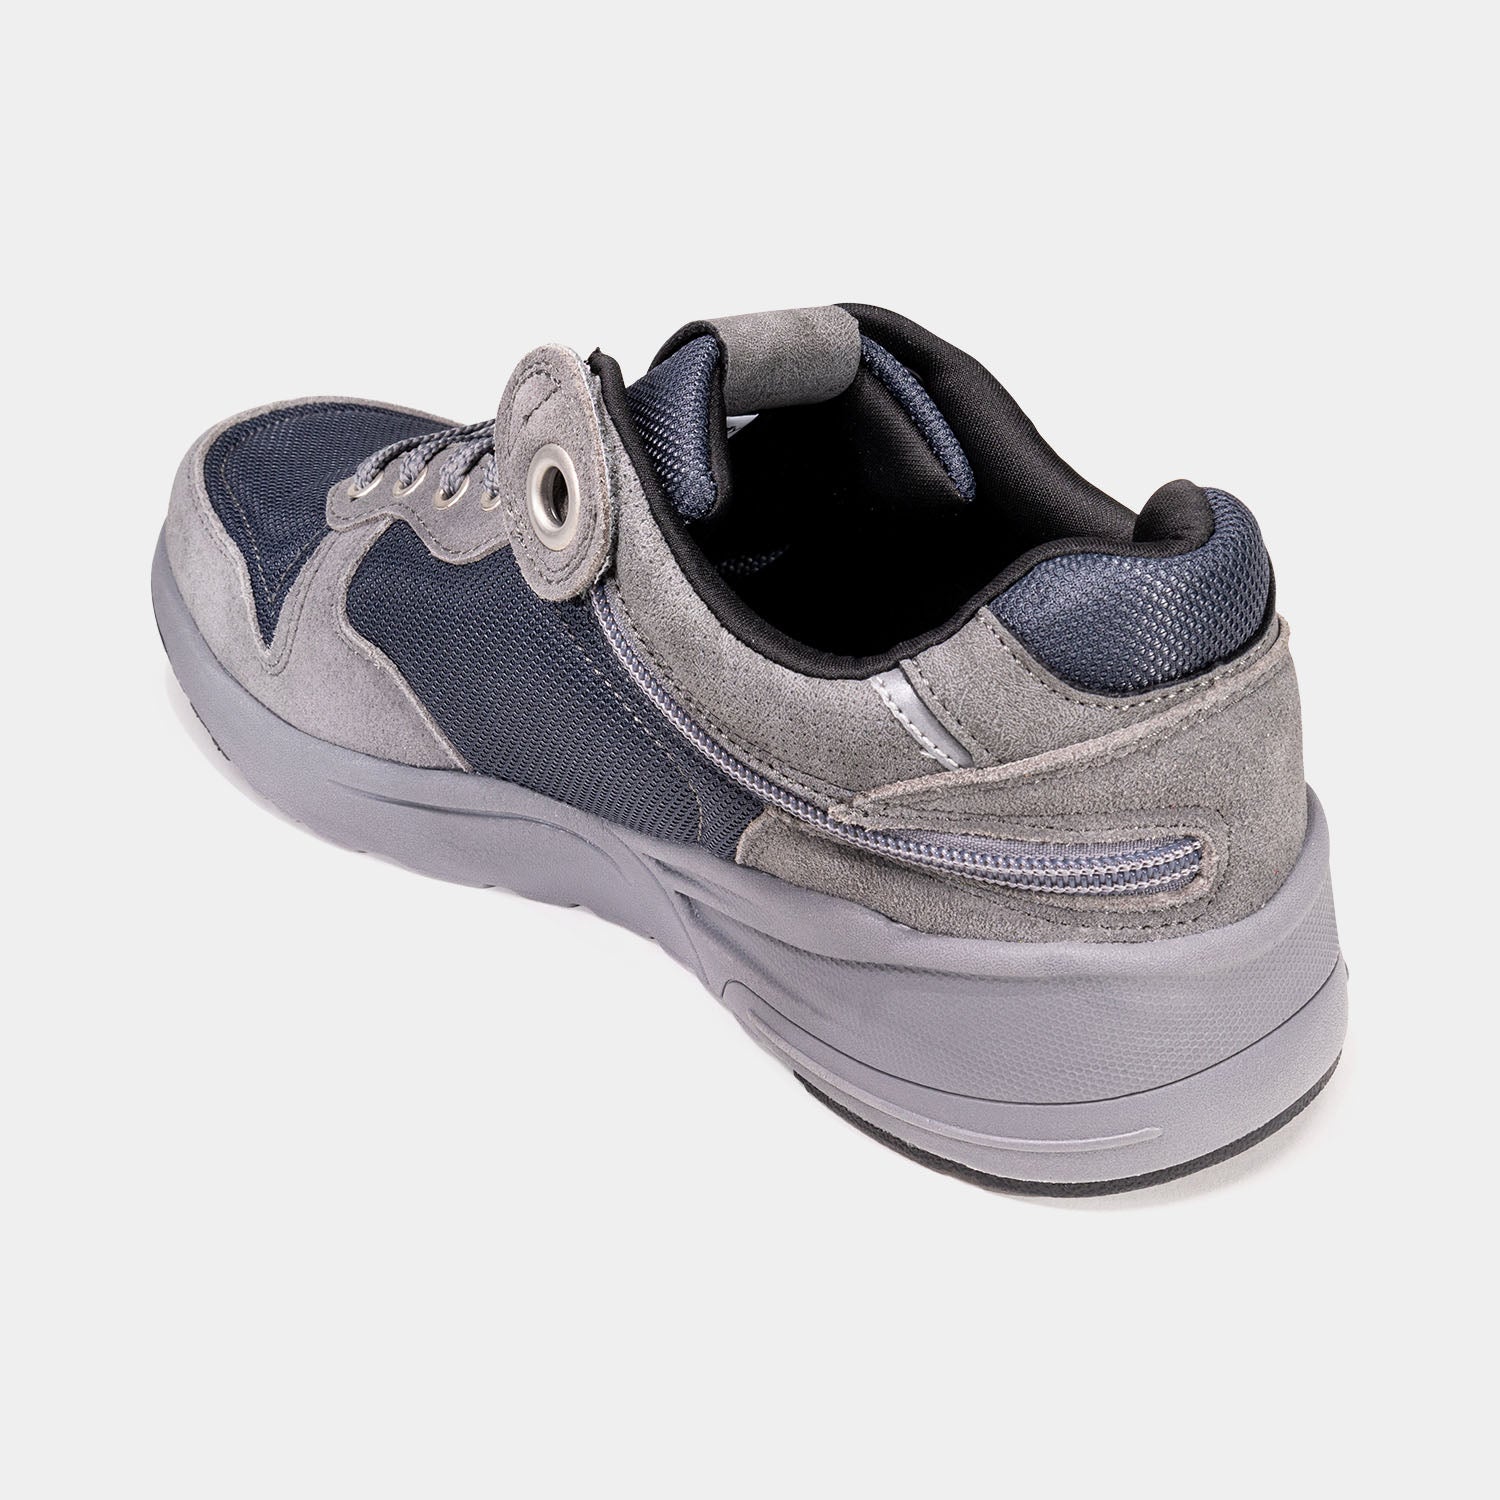 Men's Lightweight Cushioned Shoes with Rear Zipper Access